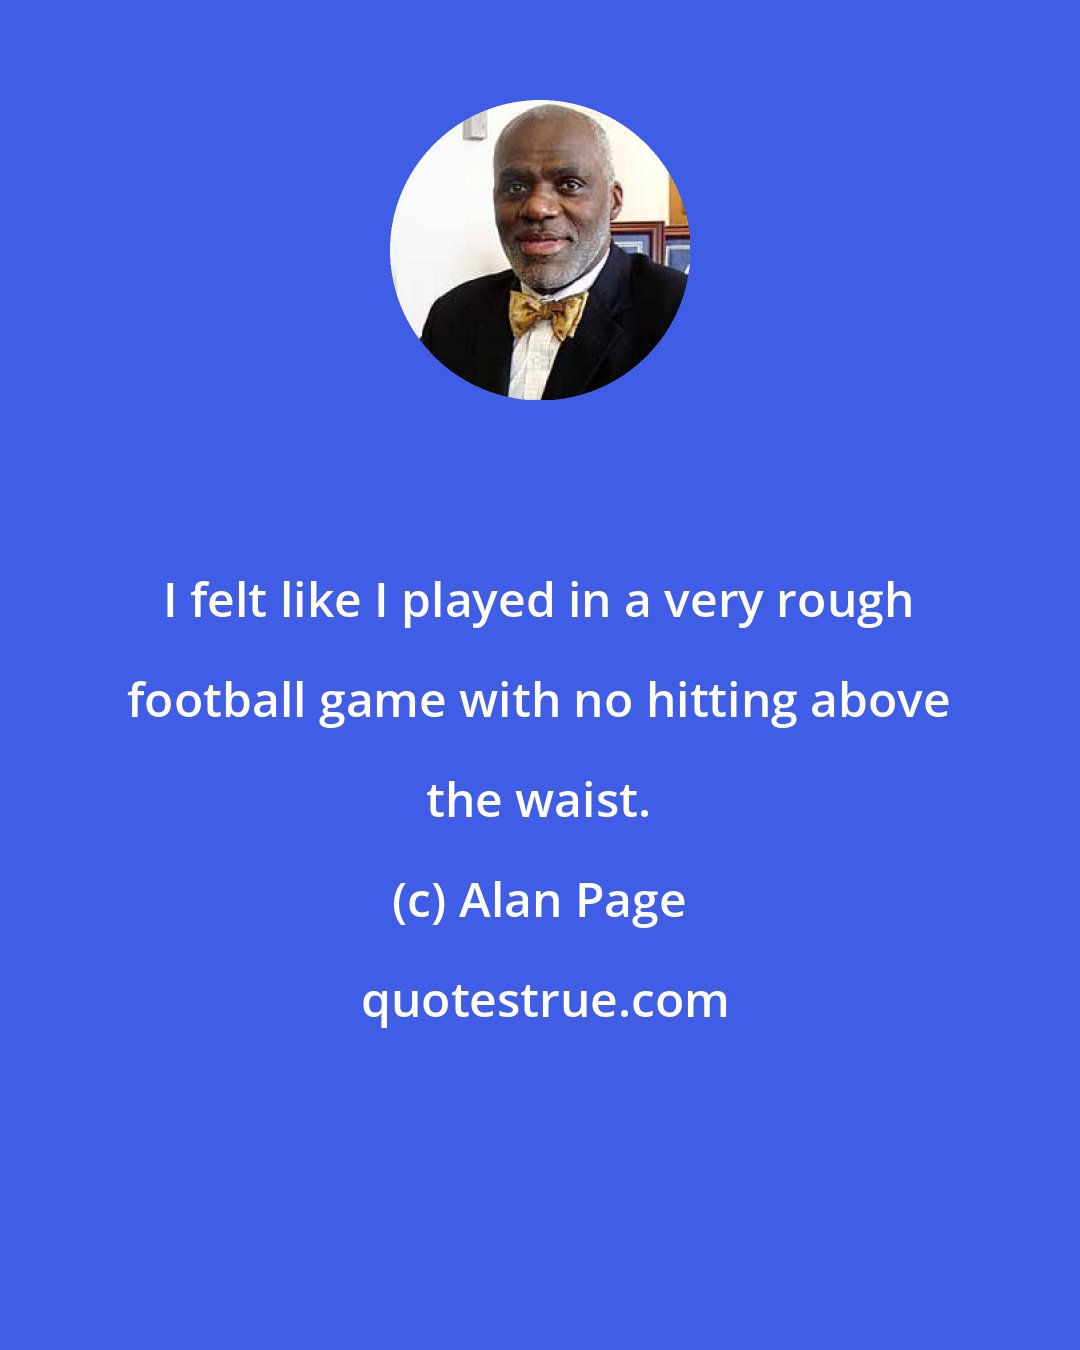 Alan Page: I felt like I played in a very rough football game with no hitting above the waist.